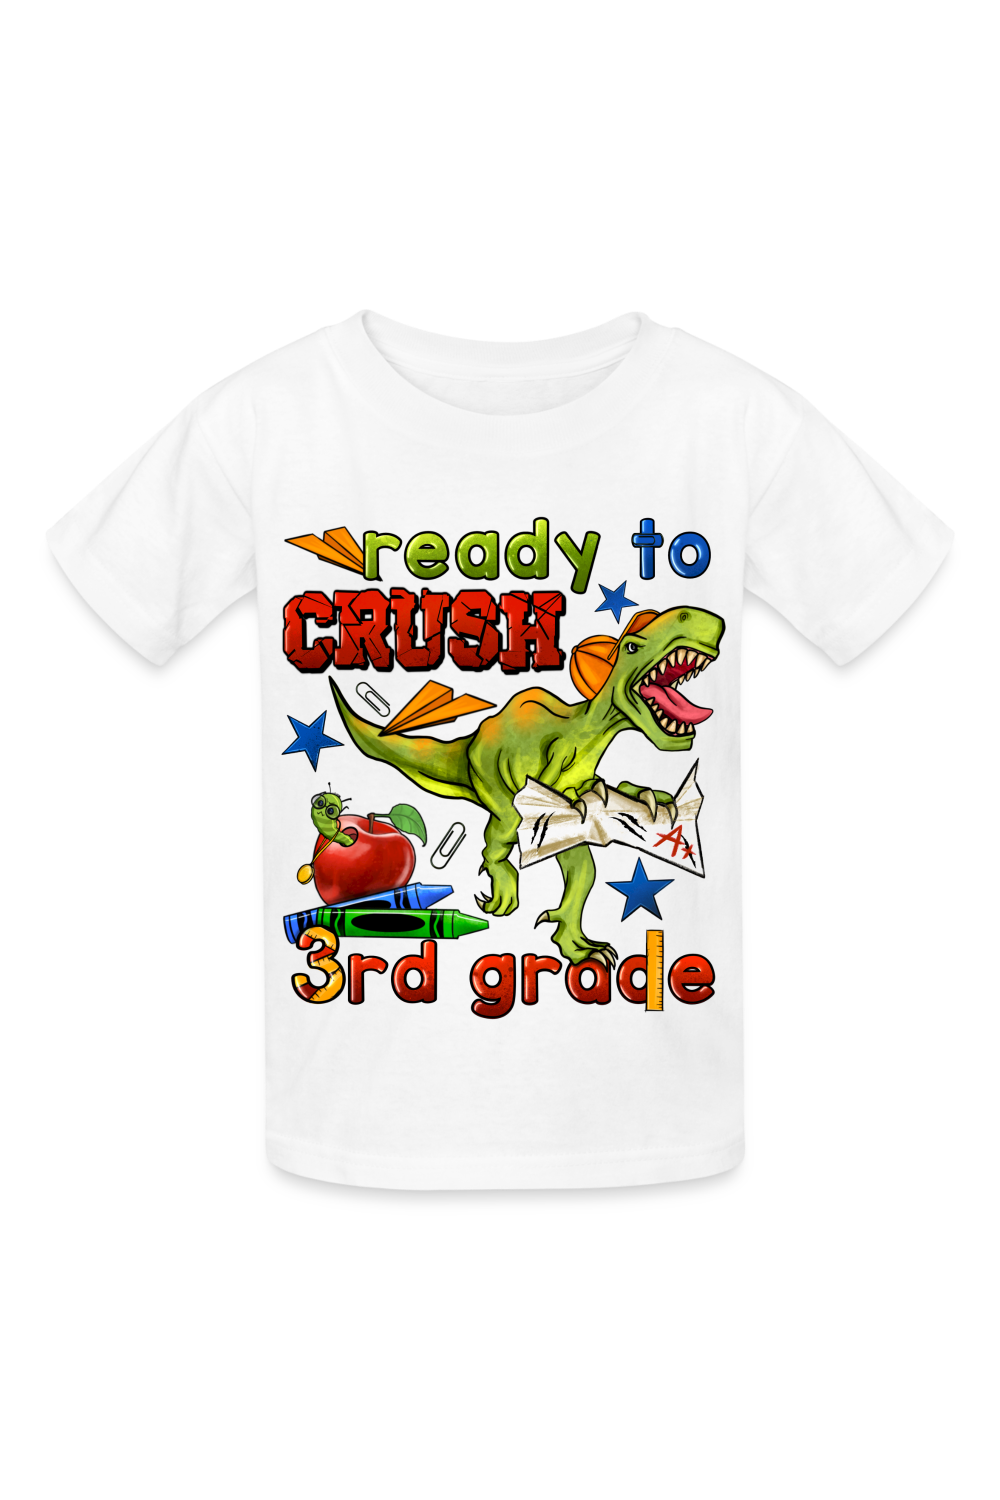 Boys Ready To Crush Third Grade Short Sleeve Tee Shirts for Back To School - white / NicholesGifts.online